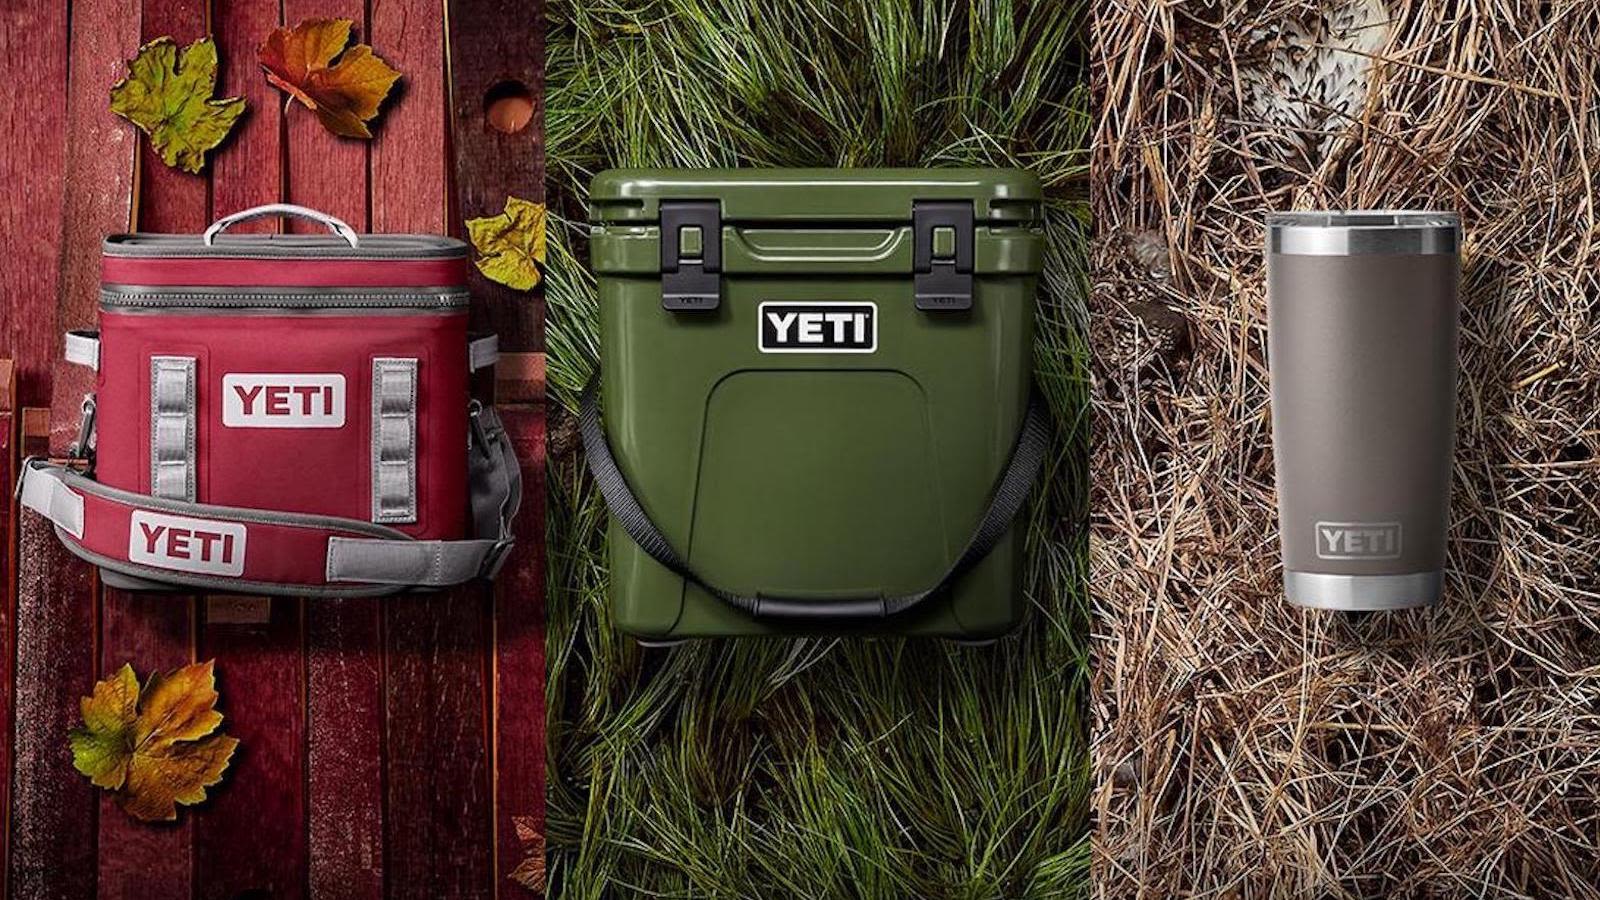 Wish list for wine lovers: YETI's new 'harvest red' collection for